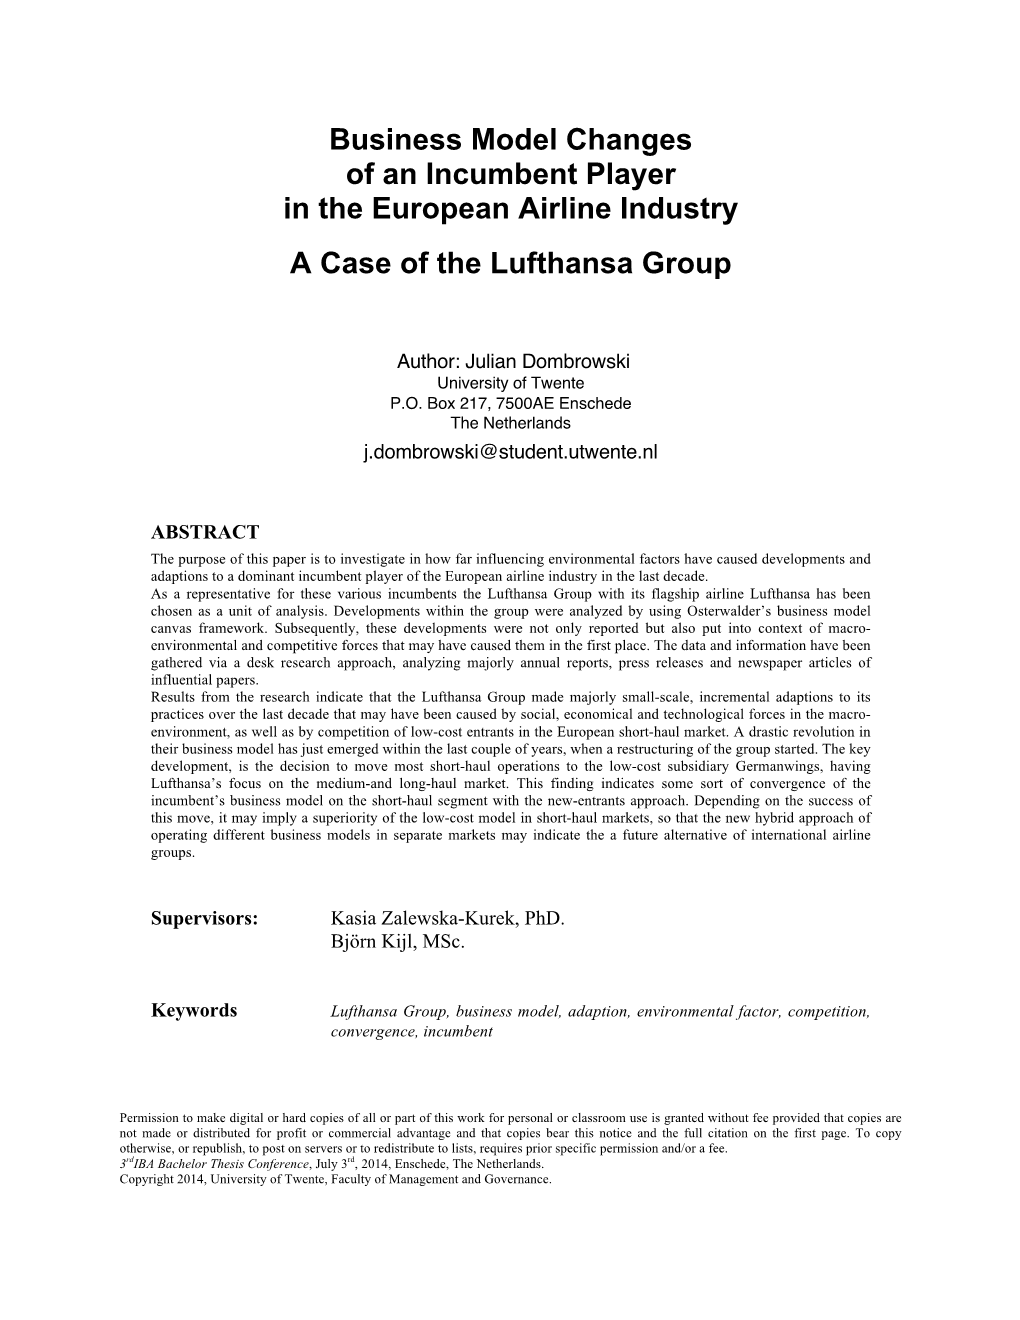 Business Model Changes of an Incumbent Player in the European Airline Industry a Case of the Lufthansa Group